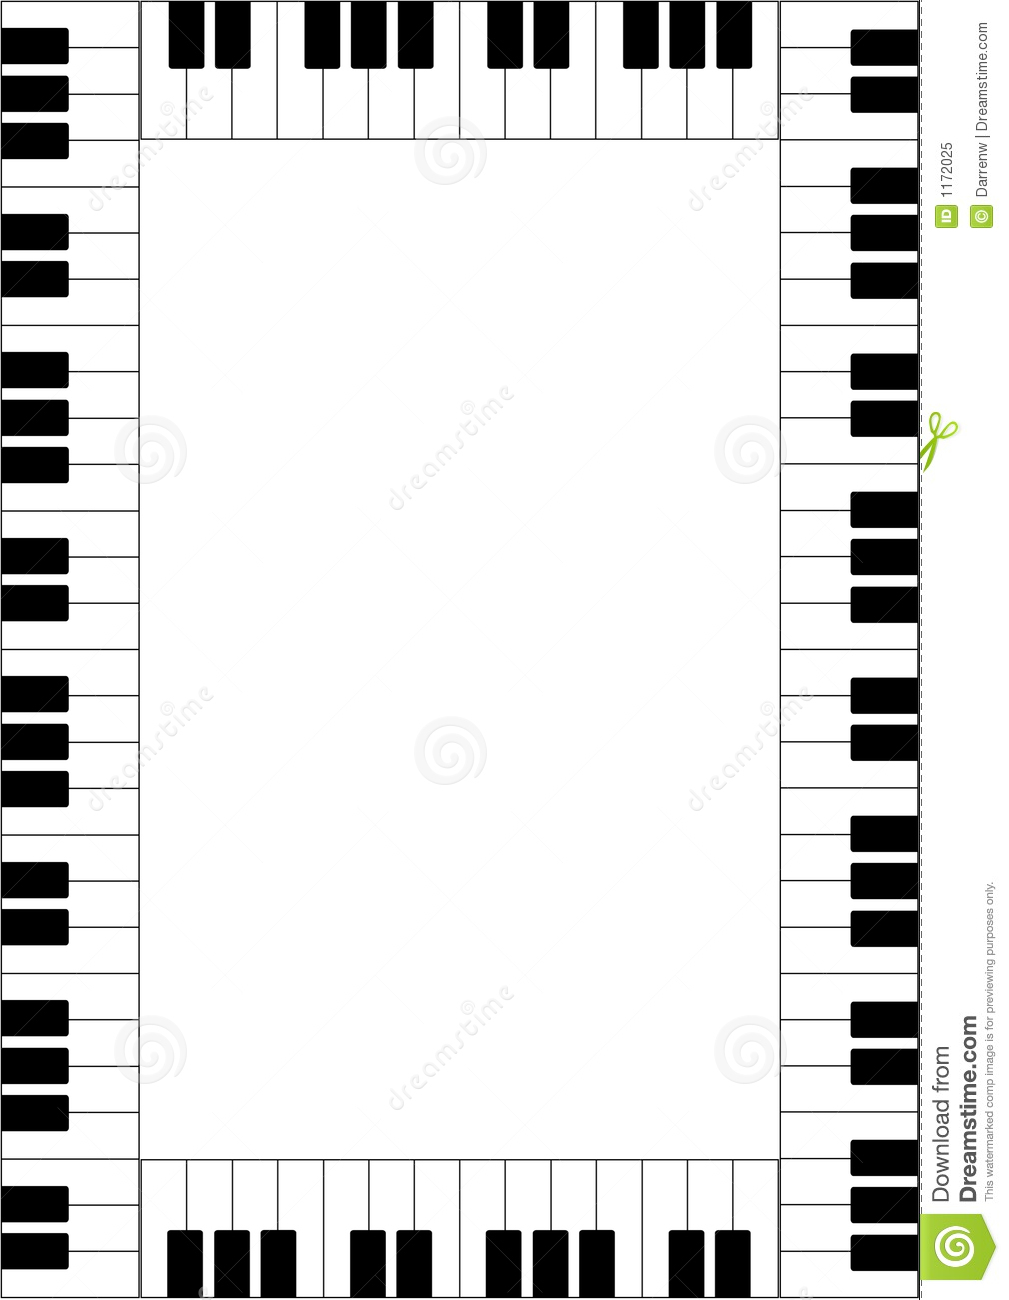 clipart piano frame